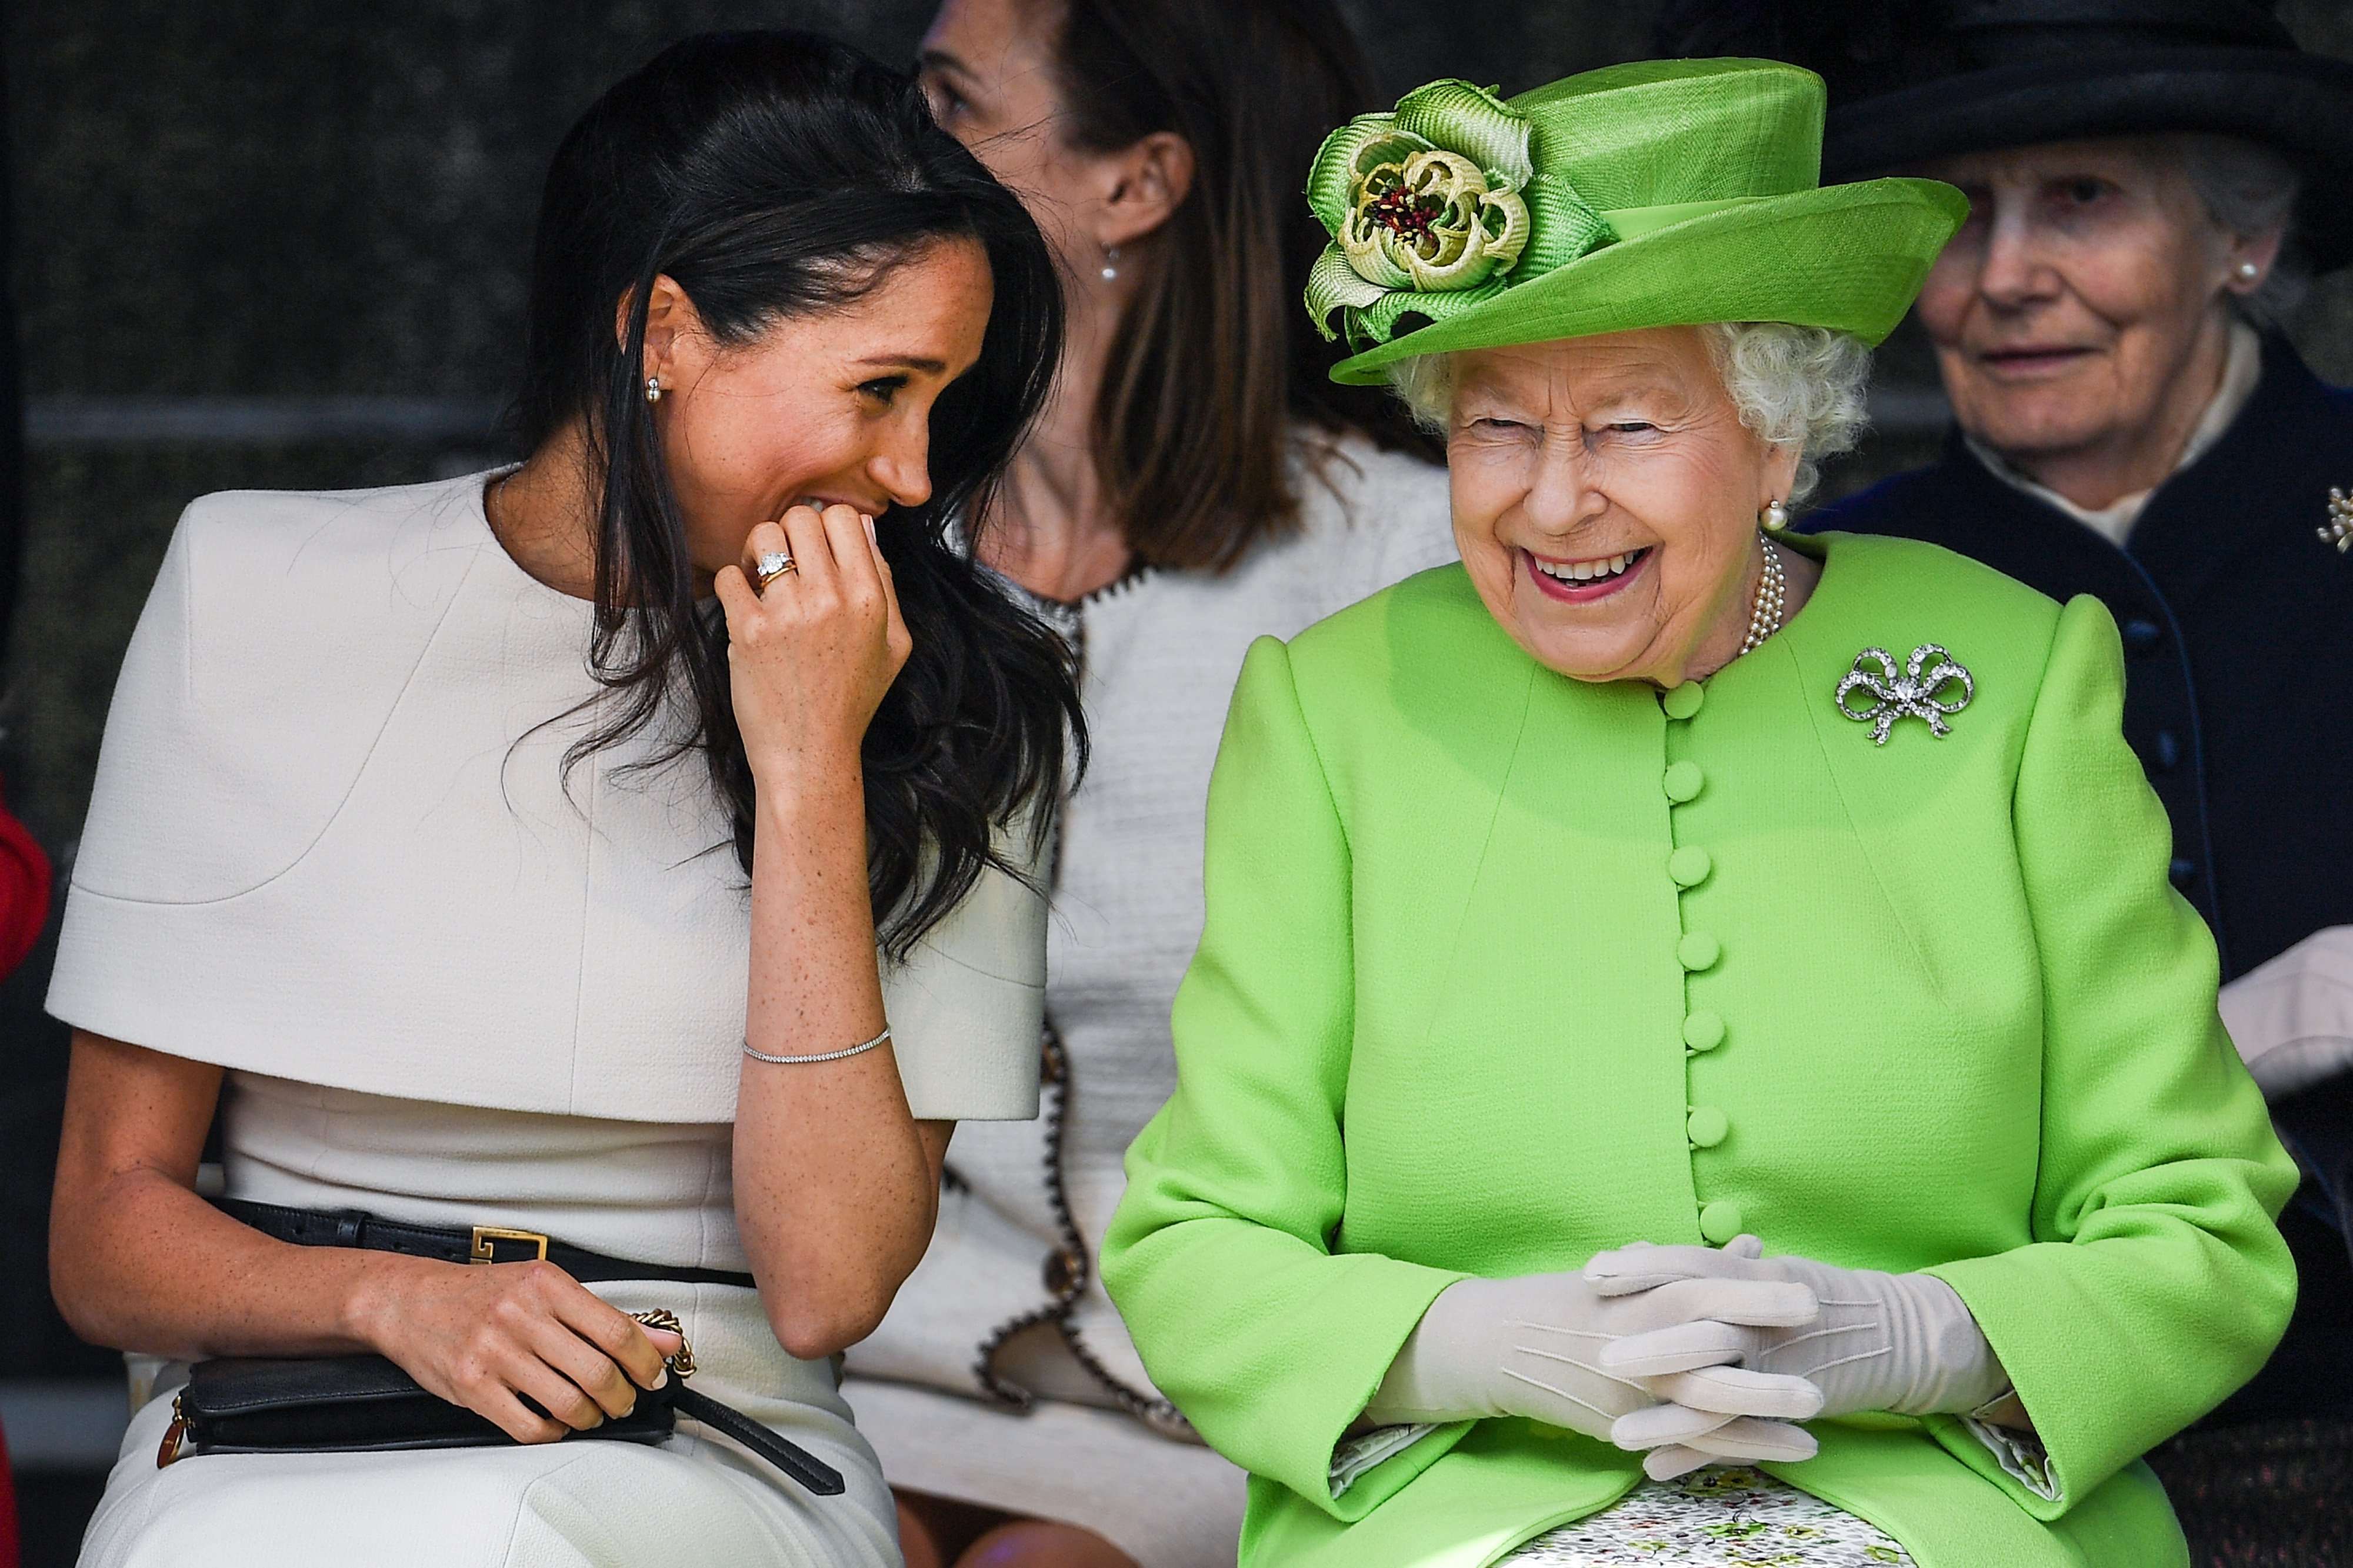 Queen Elizabeth II pictured sitting and laughing with Meghan, Duchess of Sussex during a ceremony to open the new Mersey Gateway Bridge on June 14, 2018 in Halton, Cheshire, England. | Source: Getty Images